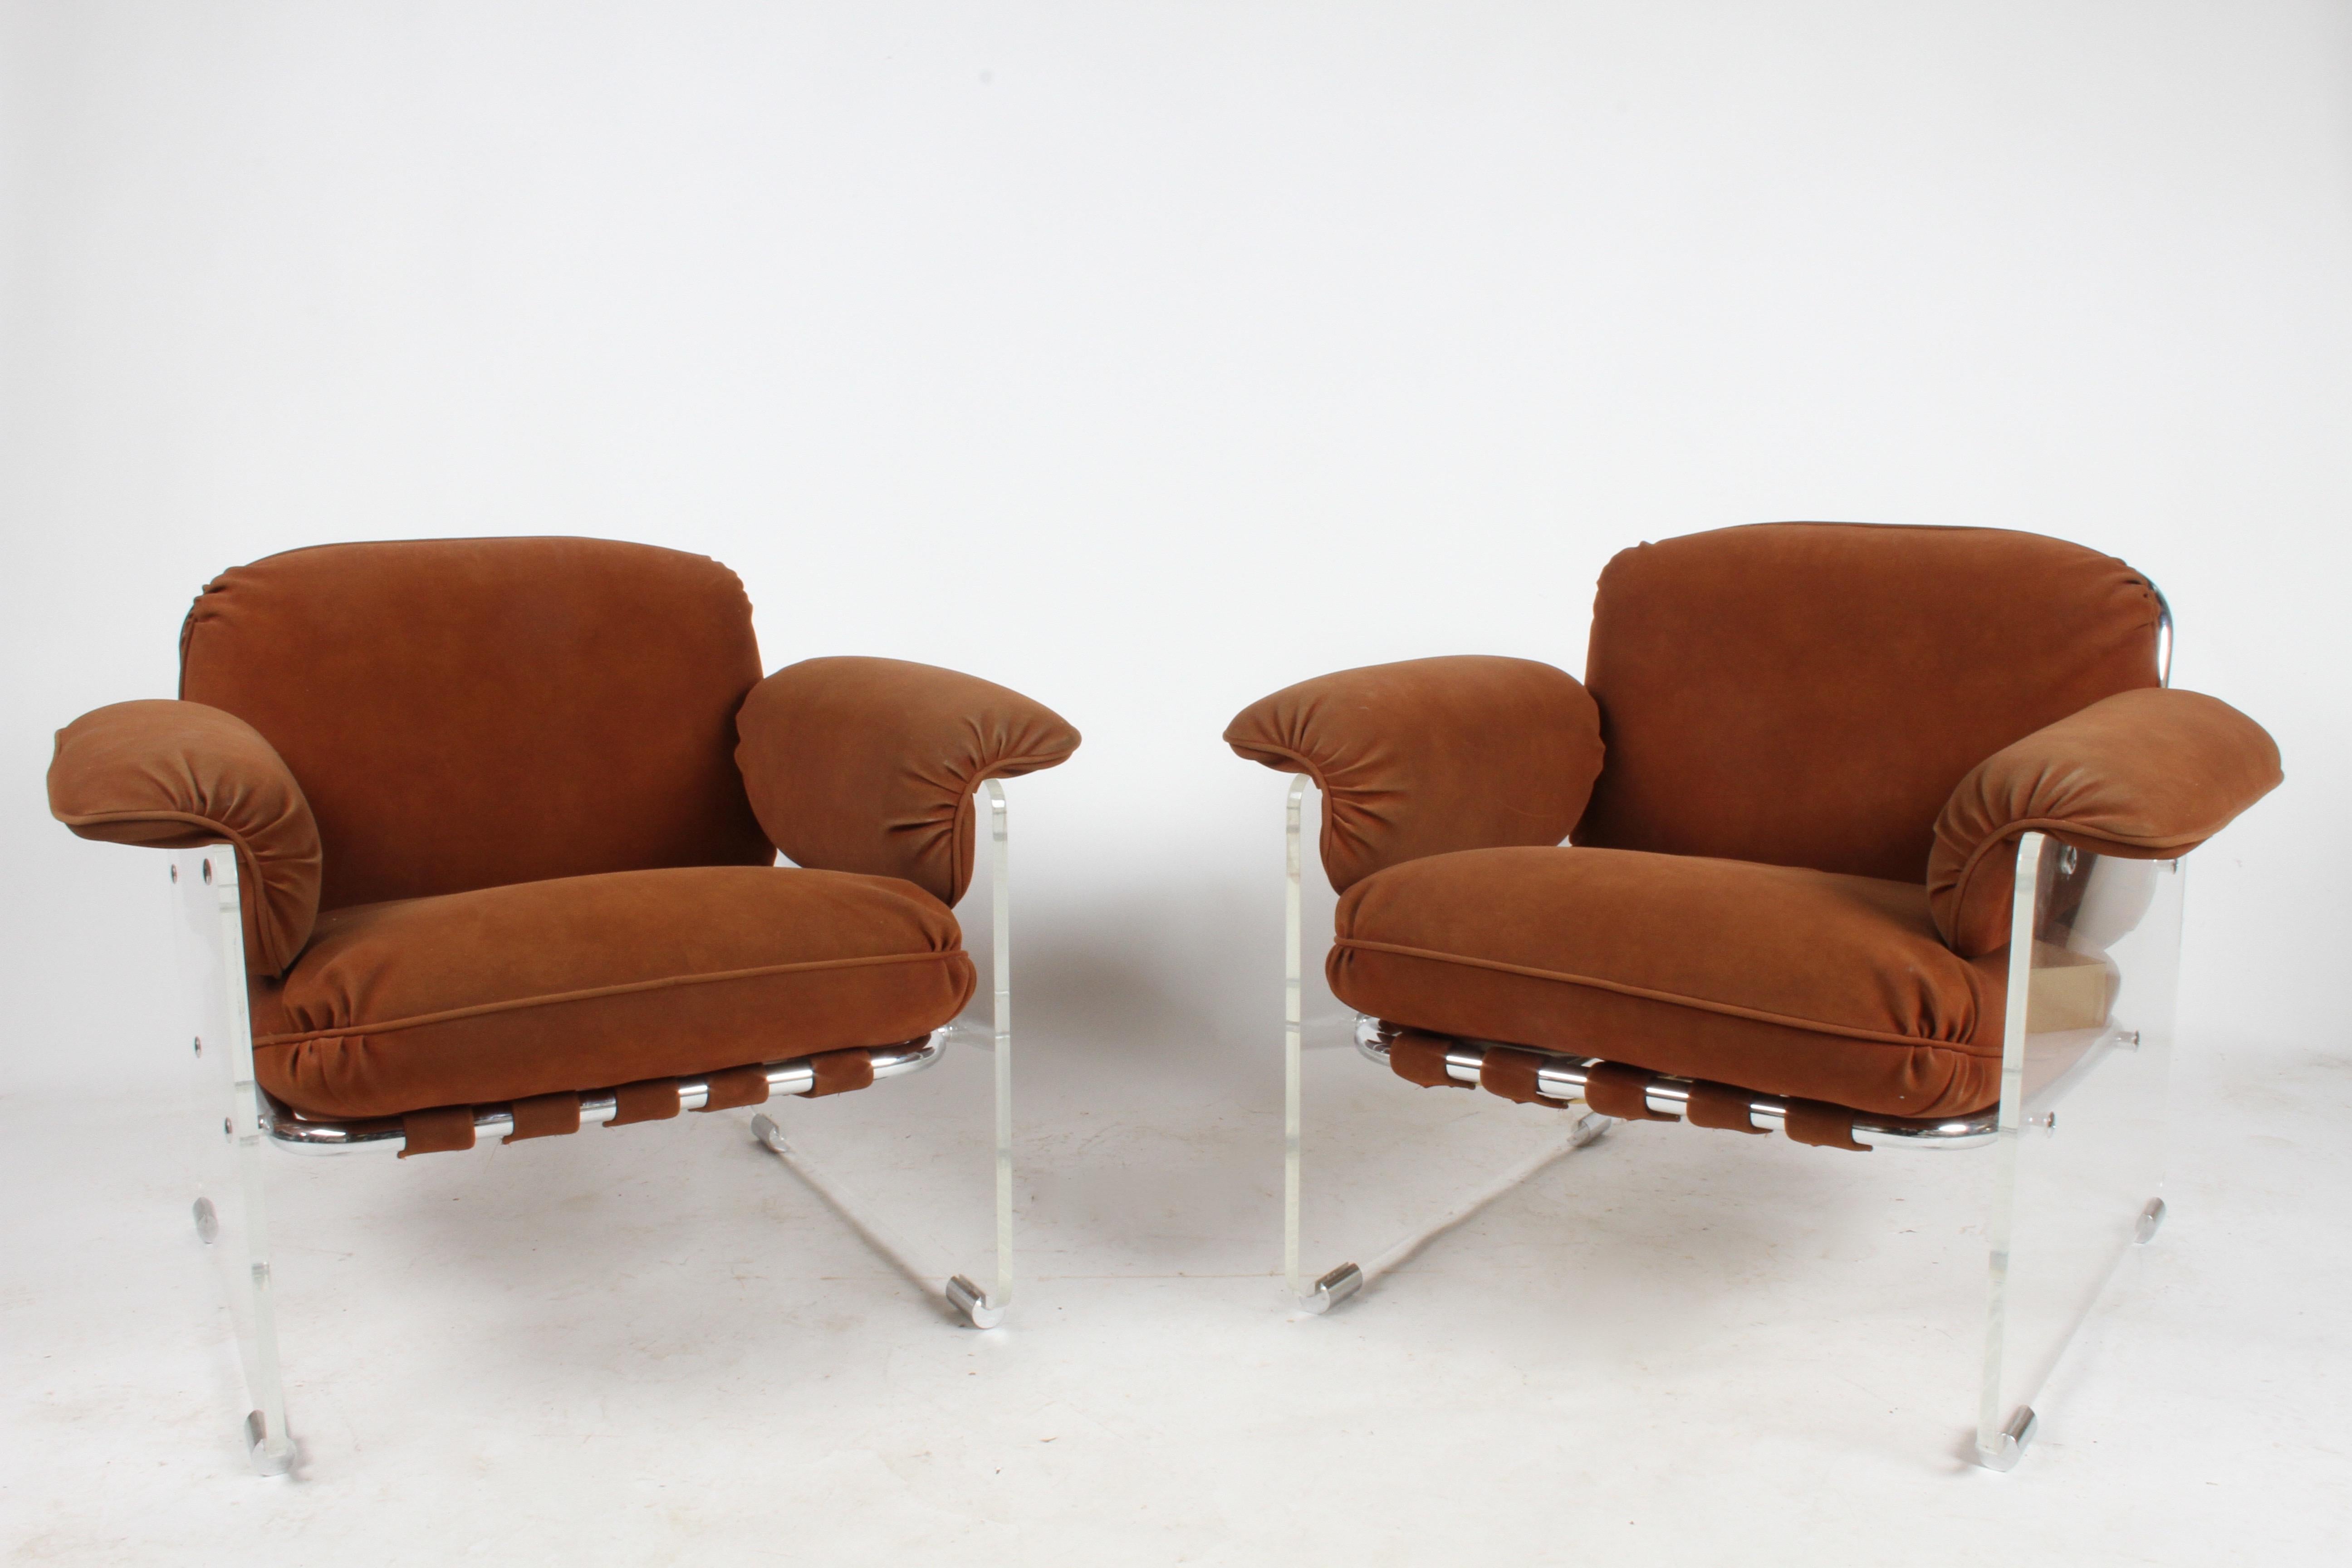 Pair of Pace collection Argenta club chairs with thick Lucite panels, original rust colored suede and tublar chrome framing. 1970s styling at its best and very comfortable too. Original suede shows some wear and age, may want to update. Lucite has